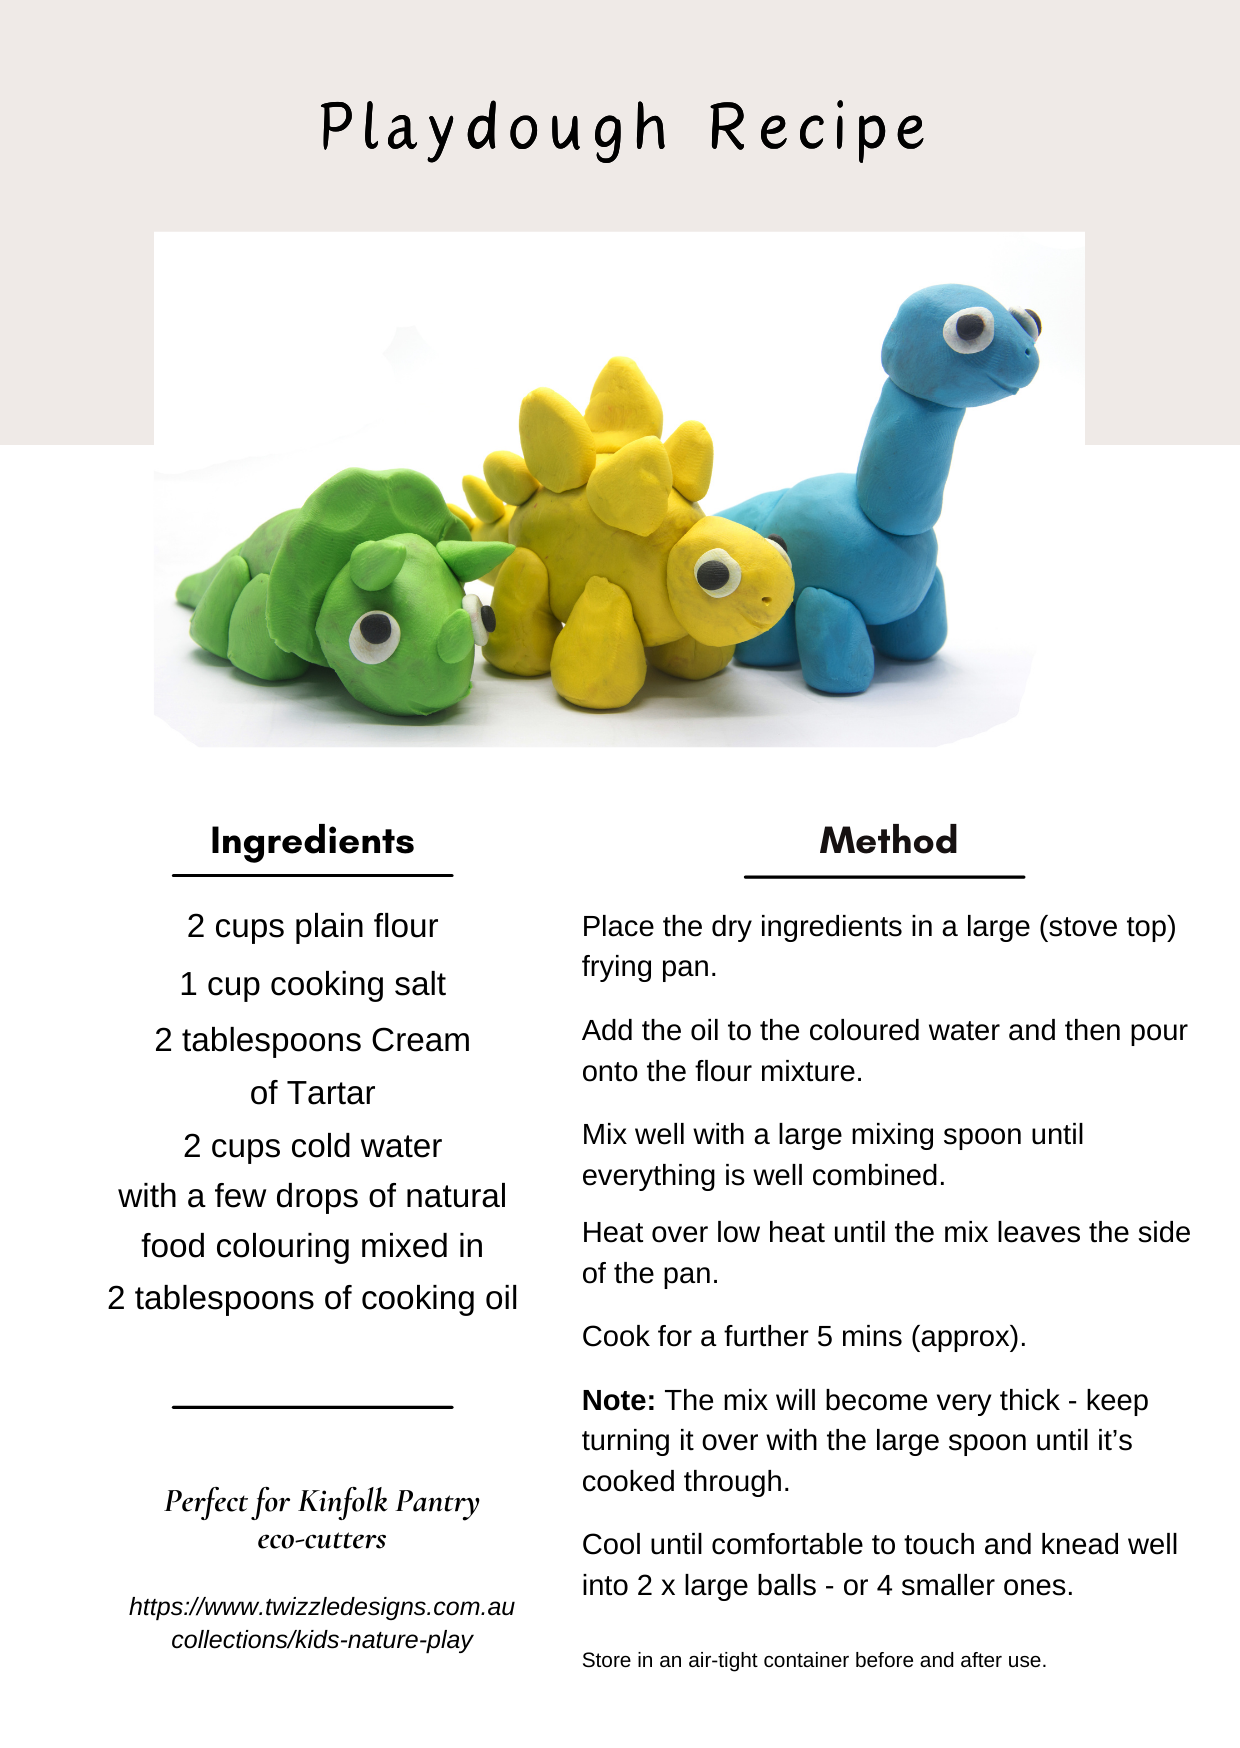 Play Dough Recipe for Kinfolk Pantry eco-cutters. Fun play dough for kids.  Recipe from Twizzle Designs.